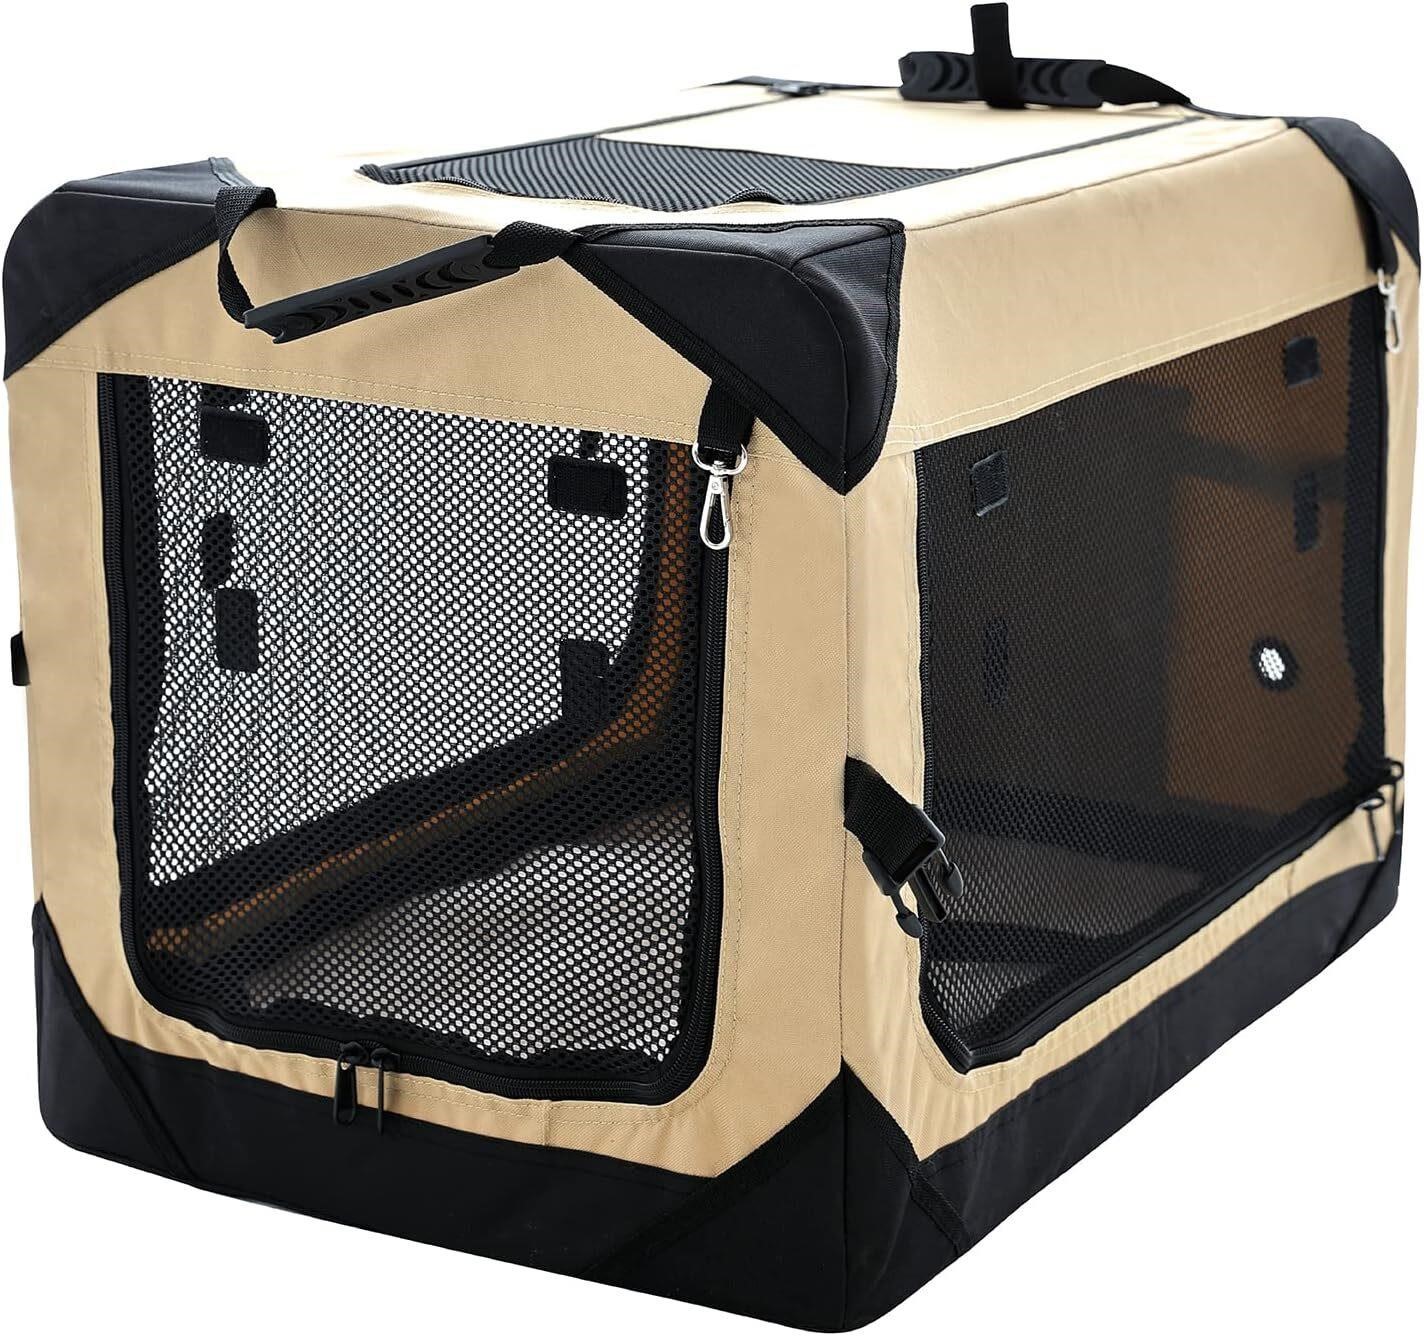 Pettycare 36 Inch Collapsible Dog Crate  Beige